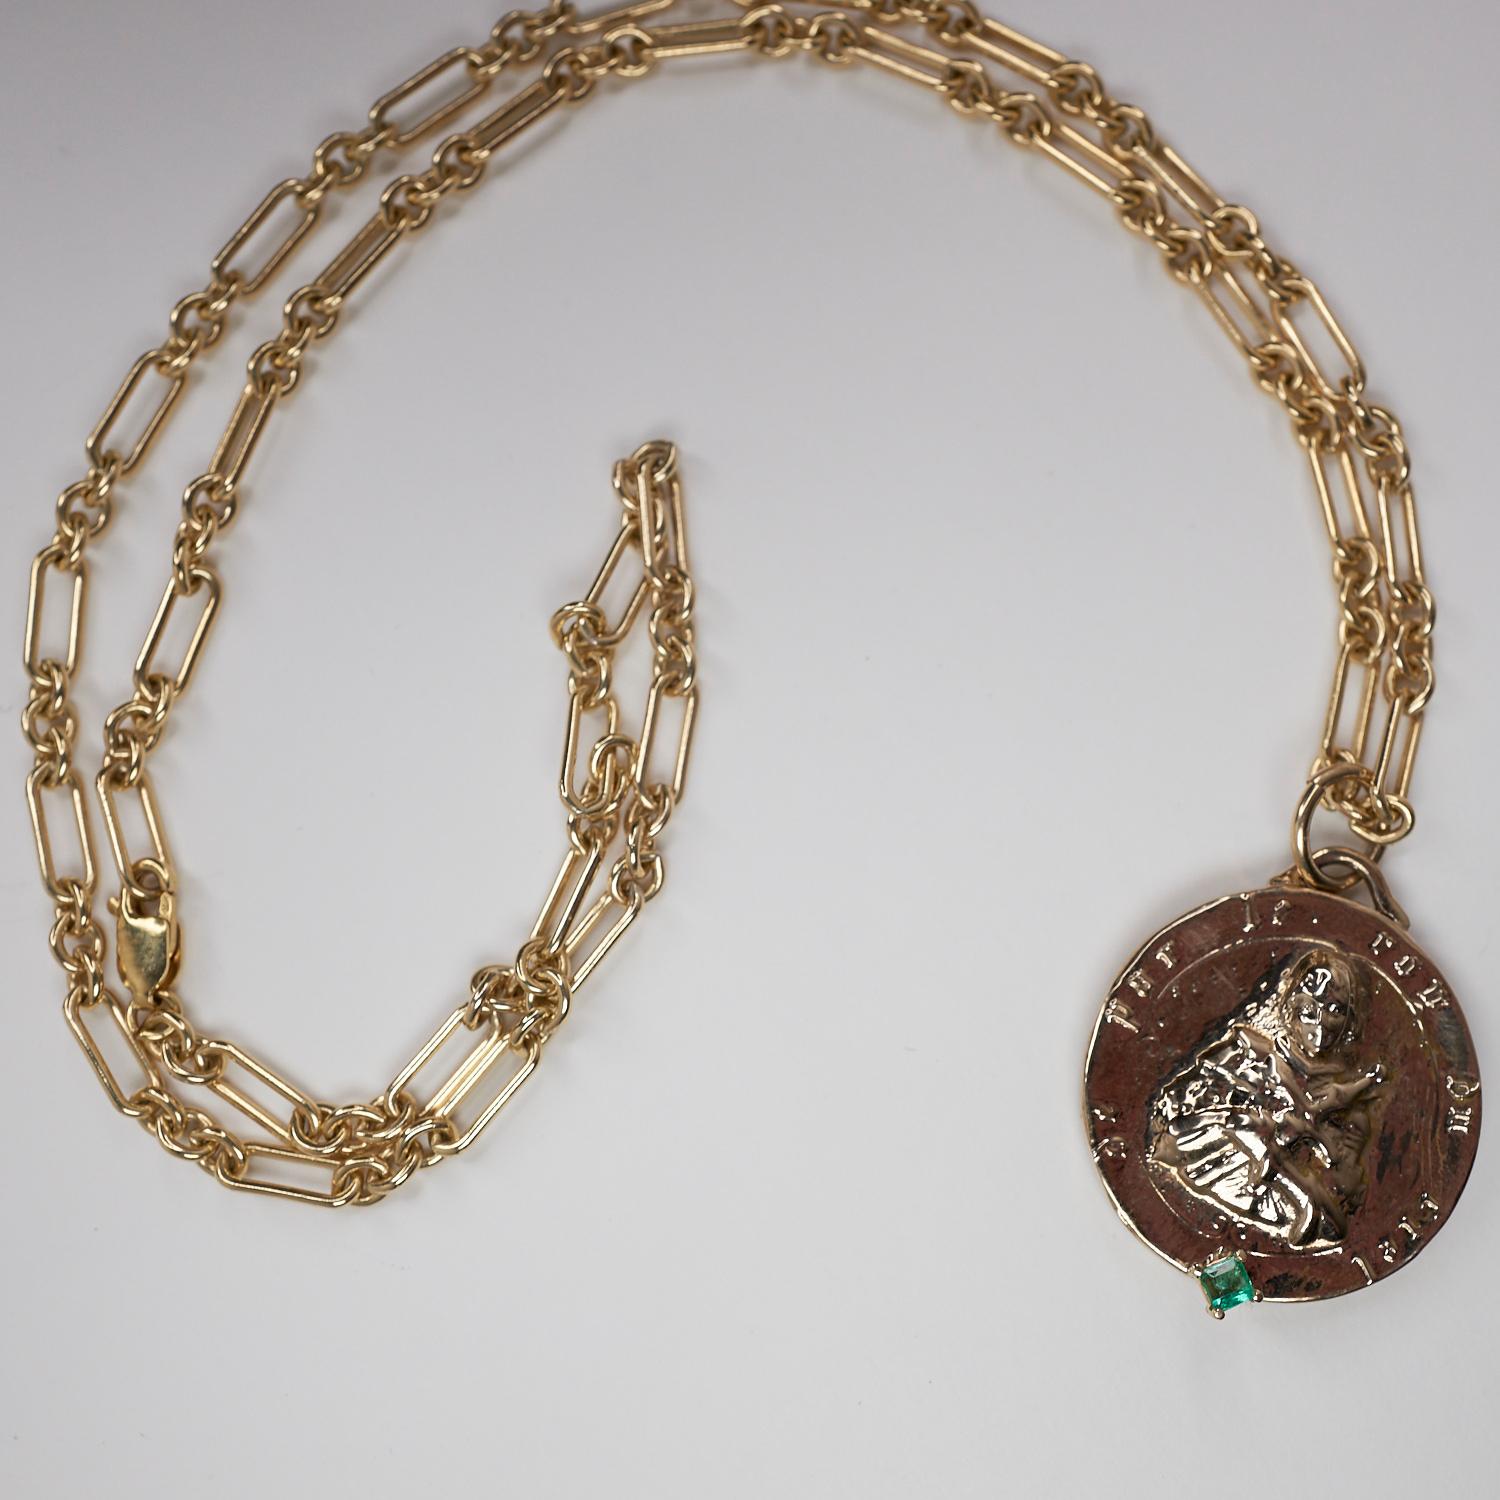 joan of arc necklace